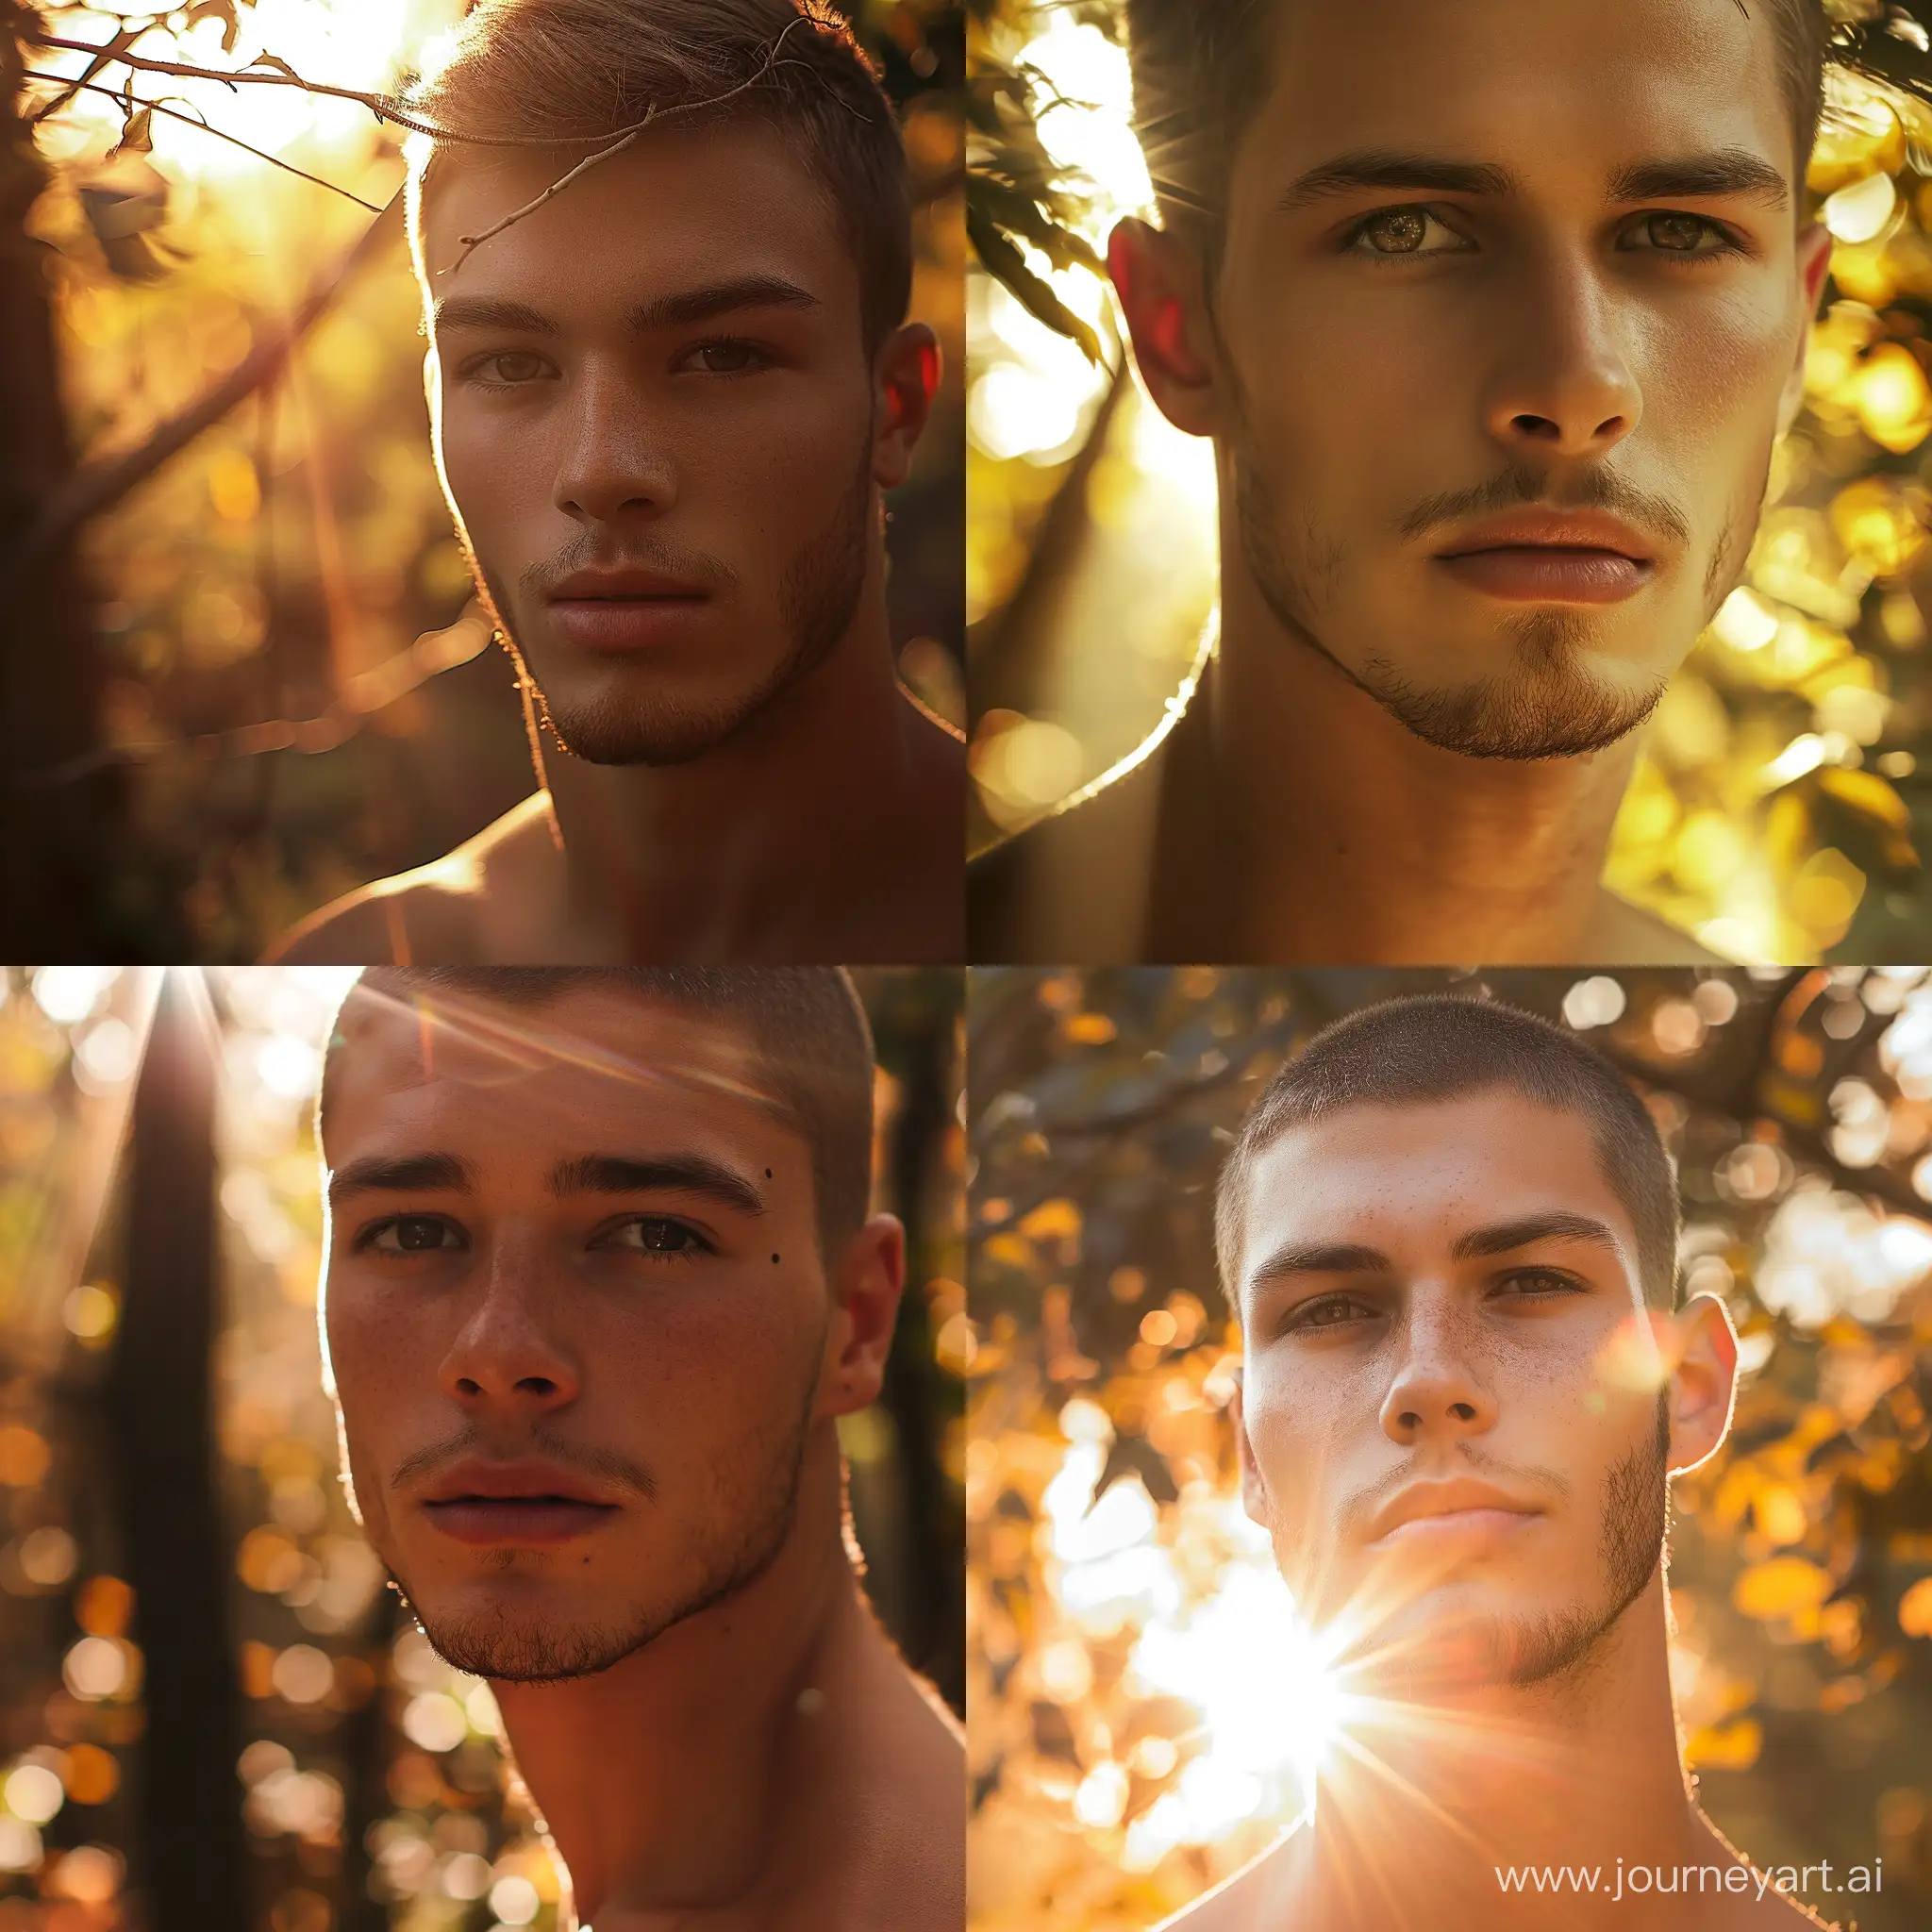 Charming-Young-Man-in-Autumnal-Sunlight